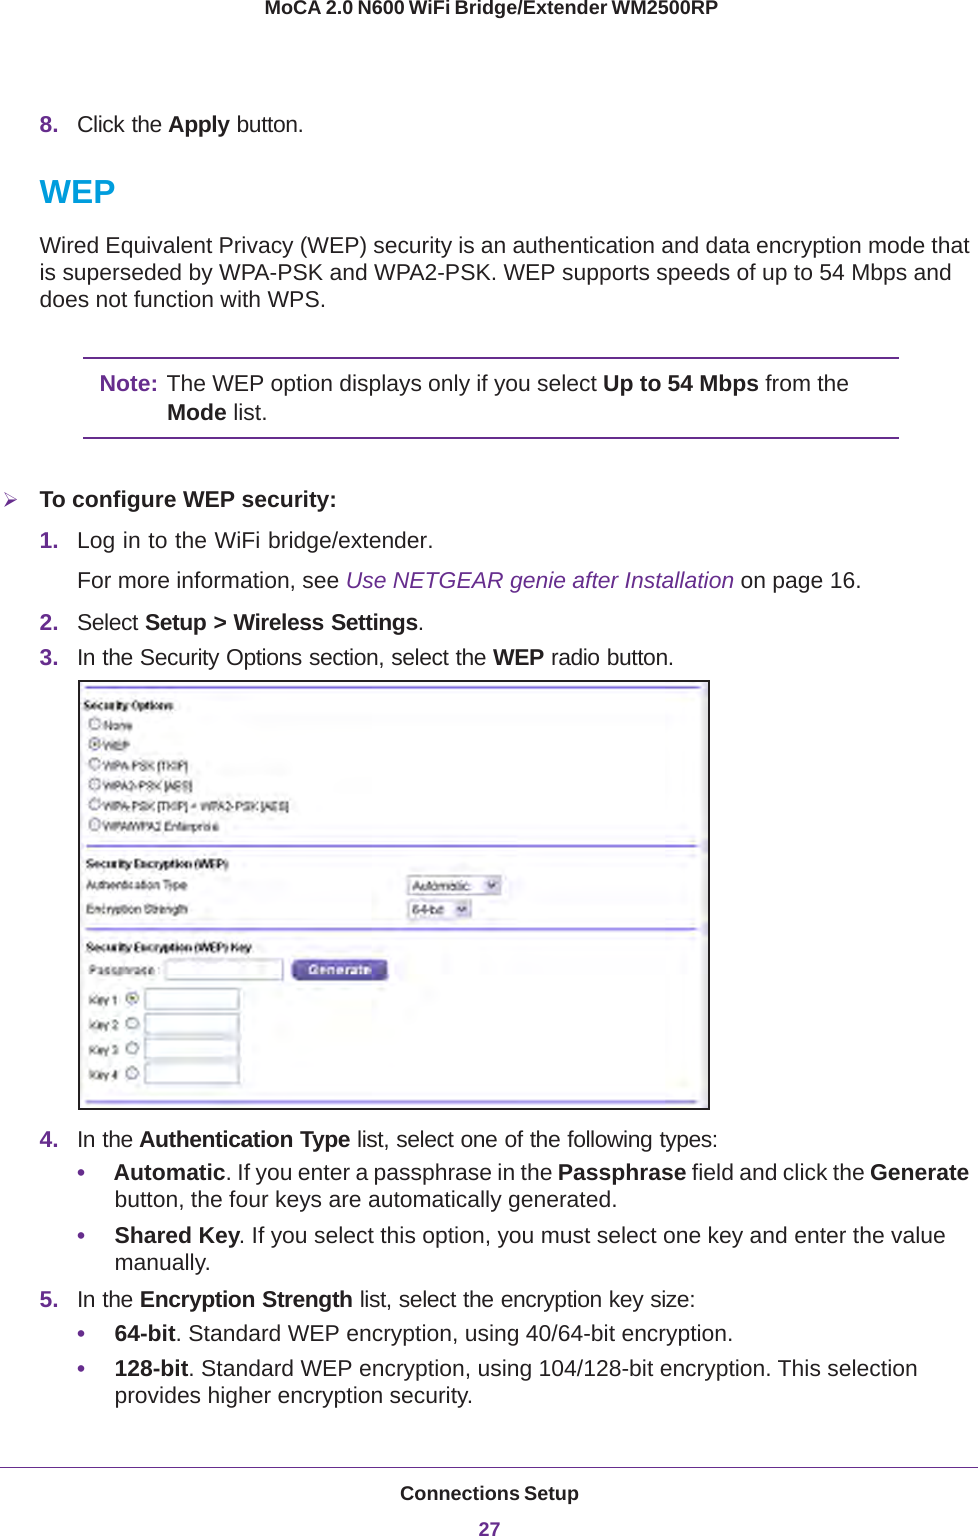 Connections Setup27 MoCA 2.0 N600 WiFi Bridge/Extender WM2500RP8. Click the Apply button.WEPWired Equivalent Privacy (WEP) security is an authentication and data encryption mode that is superseded by WPA-PSK and WPA2-PSK. WEP supports speeds of up to 54 Mbps and does not function with WPS. Note: The WEP option displays only if you select Up to 54 Mbps from the Mode list.To configure WEP security:1. Log in to the WiFi bridge/extender.For more information, see Use NETGEAR genie after Installation on page  16.2. Select Setup &gt; Wireless Settings.3. In the Security Options section, select the WEP radio button.4. In the Authentication Type list, select one of the following types:•Automatic. If you enter a passphrase in the Passphrase field and click the Generate button, the four keys are automatically generated.•Shared Key. If you select this option, you must select one key and enter the value manually.5. In the Encryption Strength list, select the encryption key size:•64-bit. Standard WEP encryption, using 40/64-bit encryption.•128-bit. Standard WEP encryption, using 104/128-bit encryption. This selection provides higher encryption security.